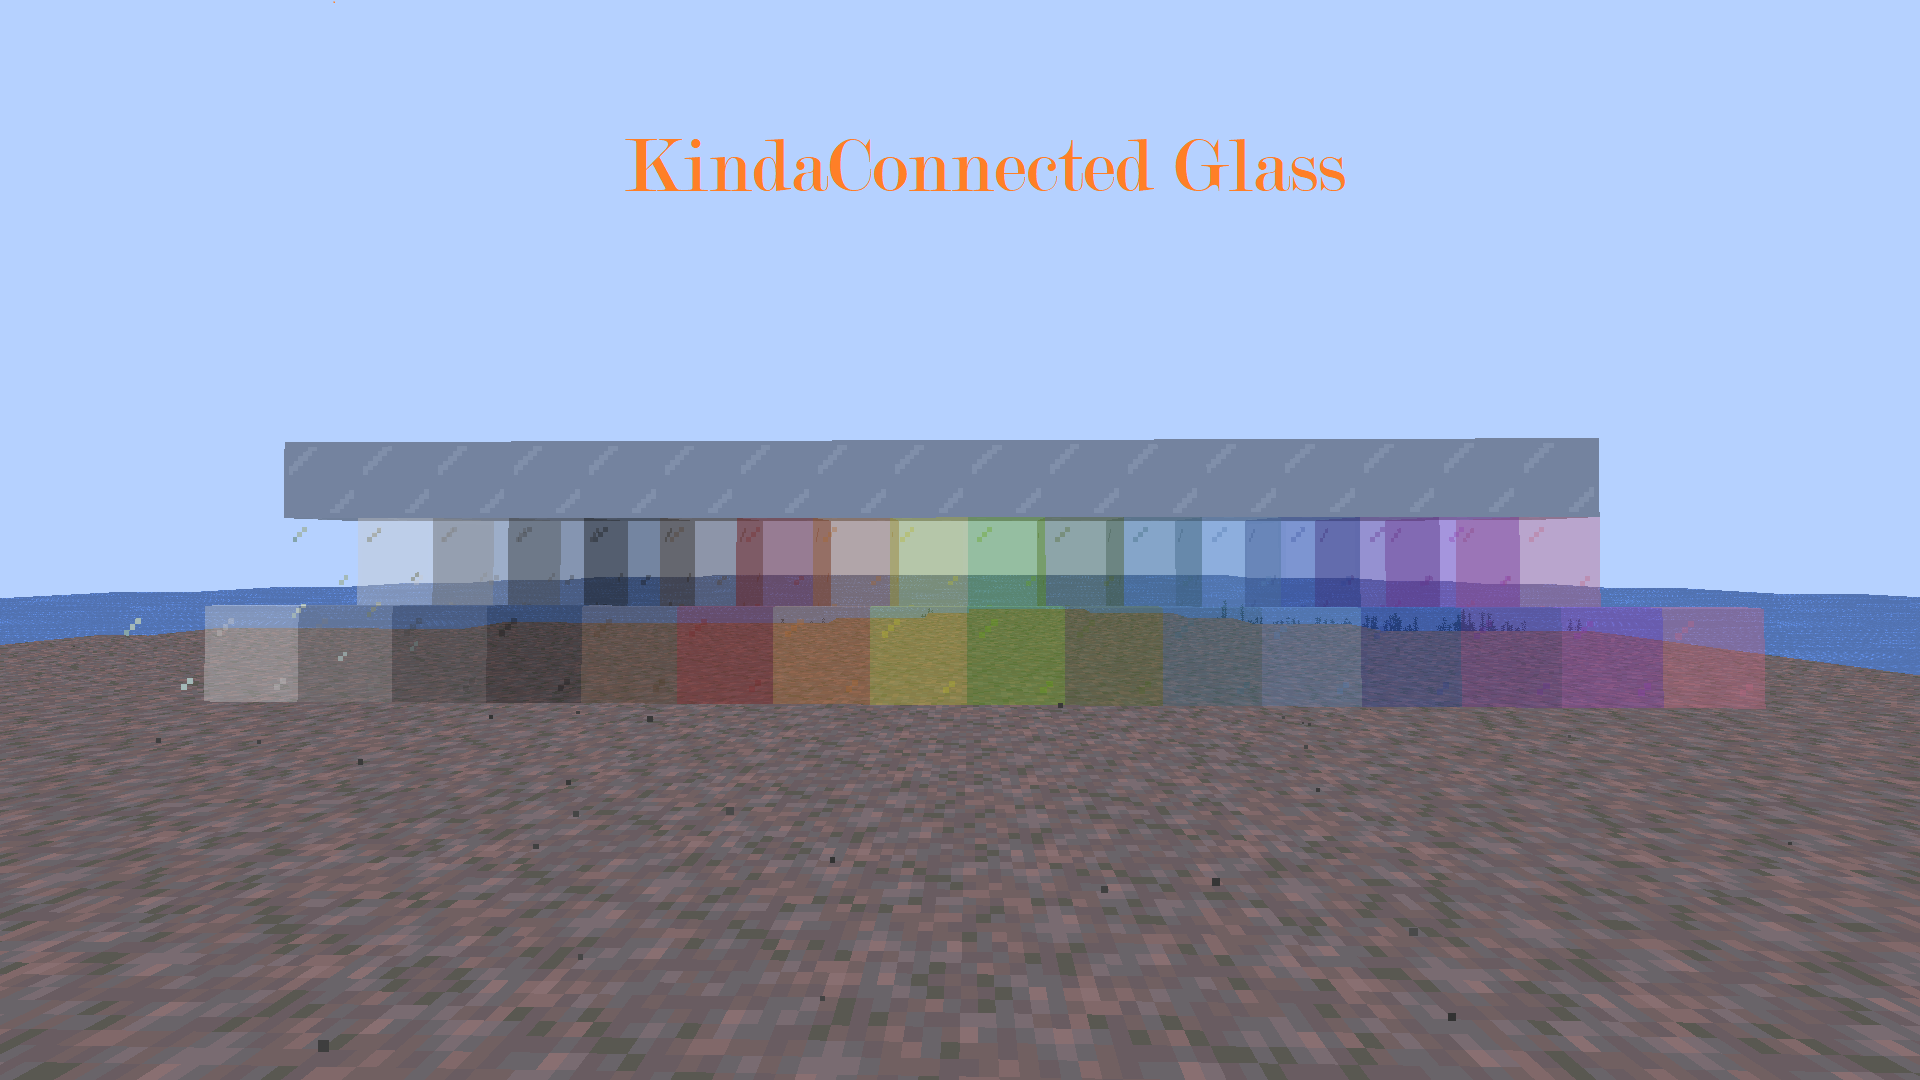 KindaConnected Glass